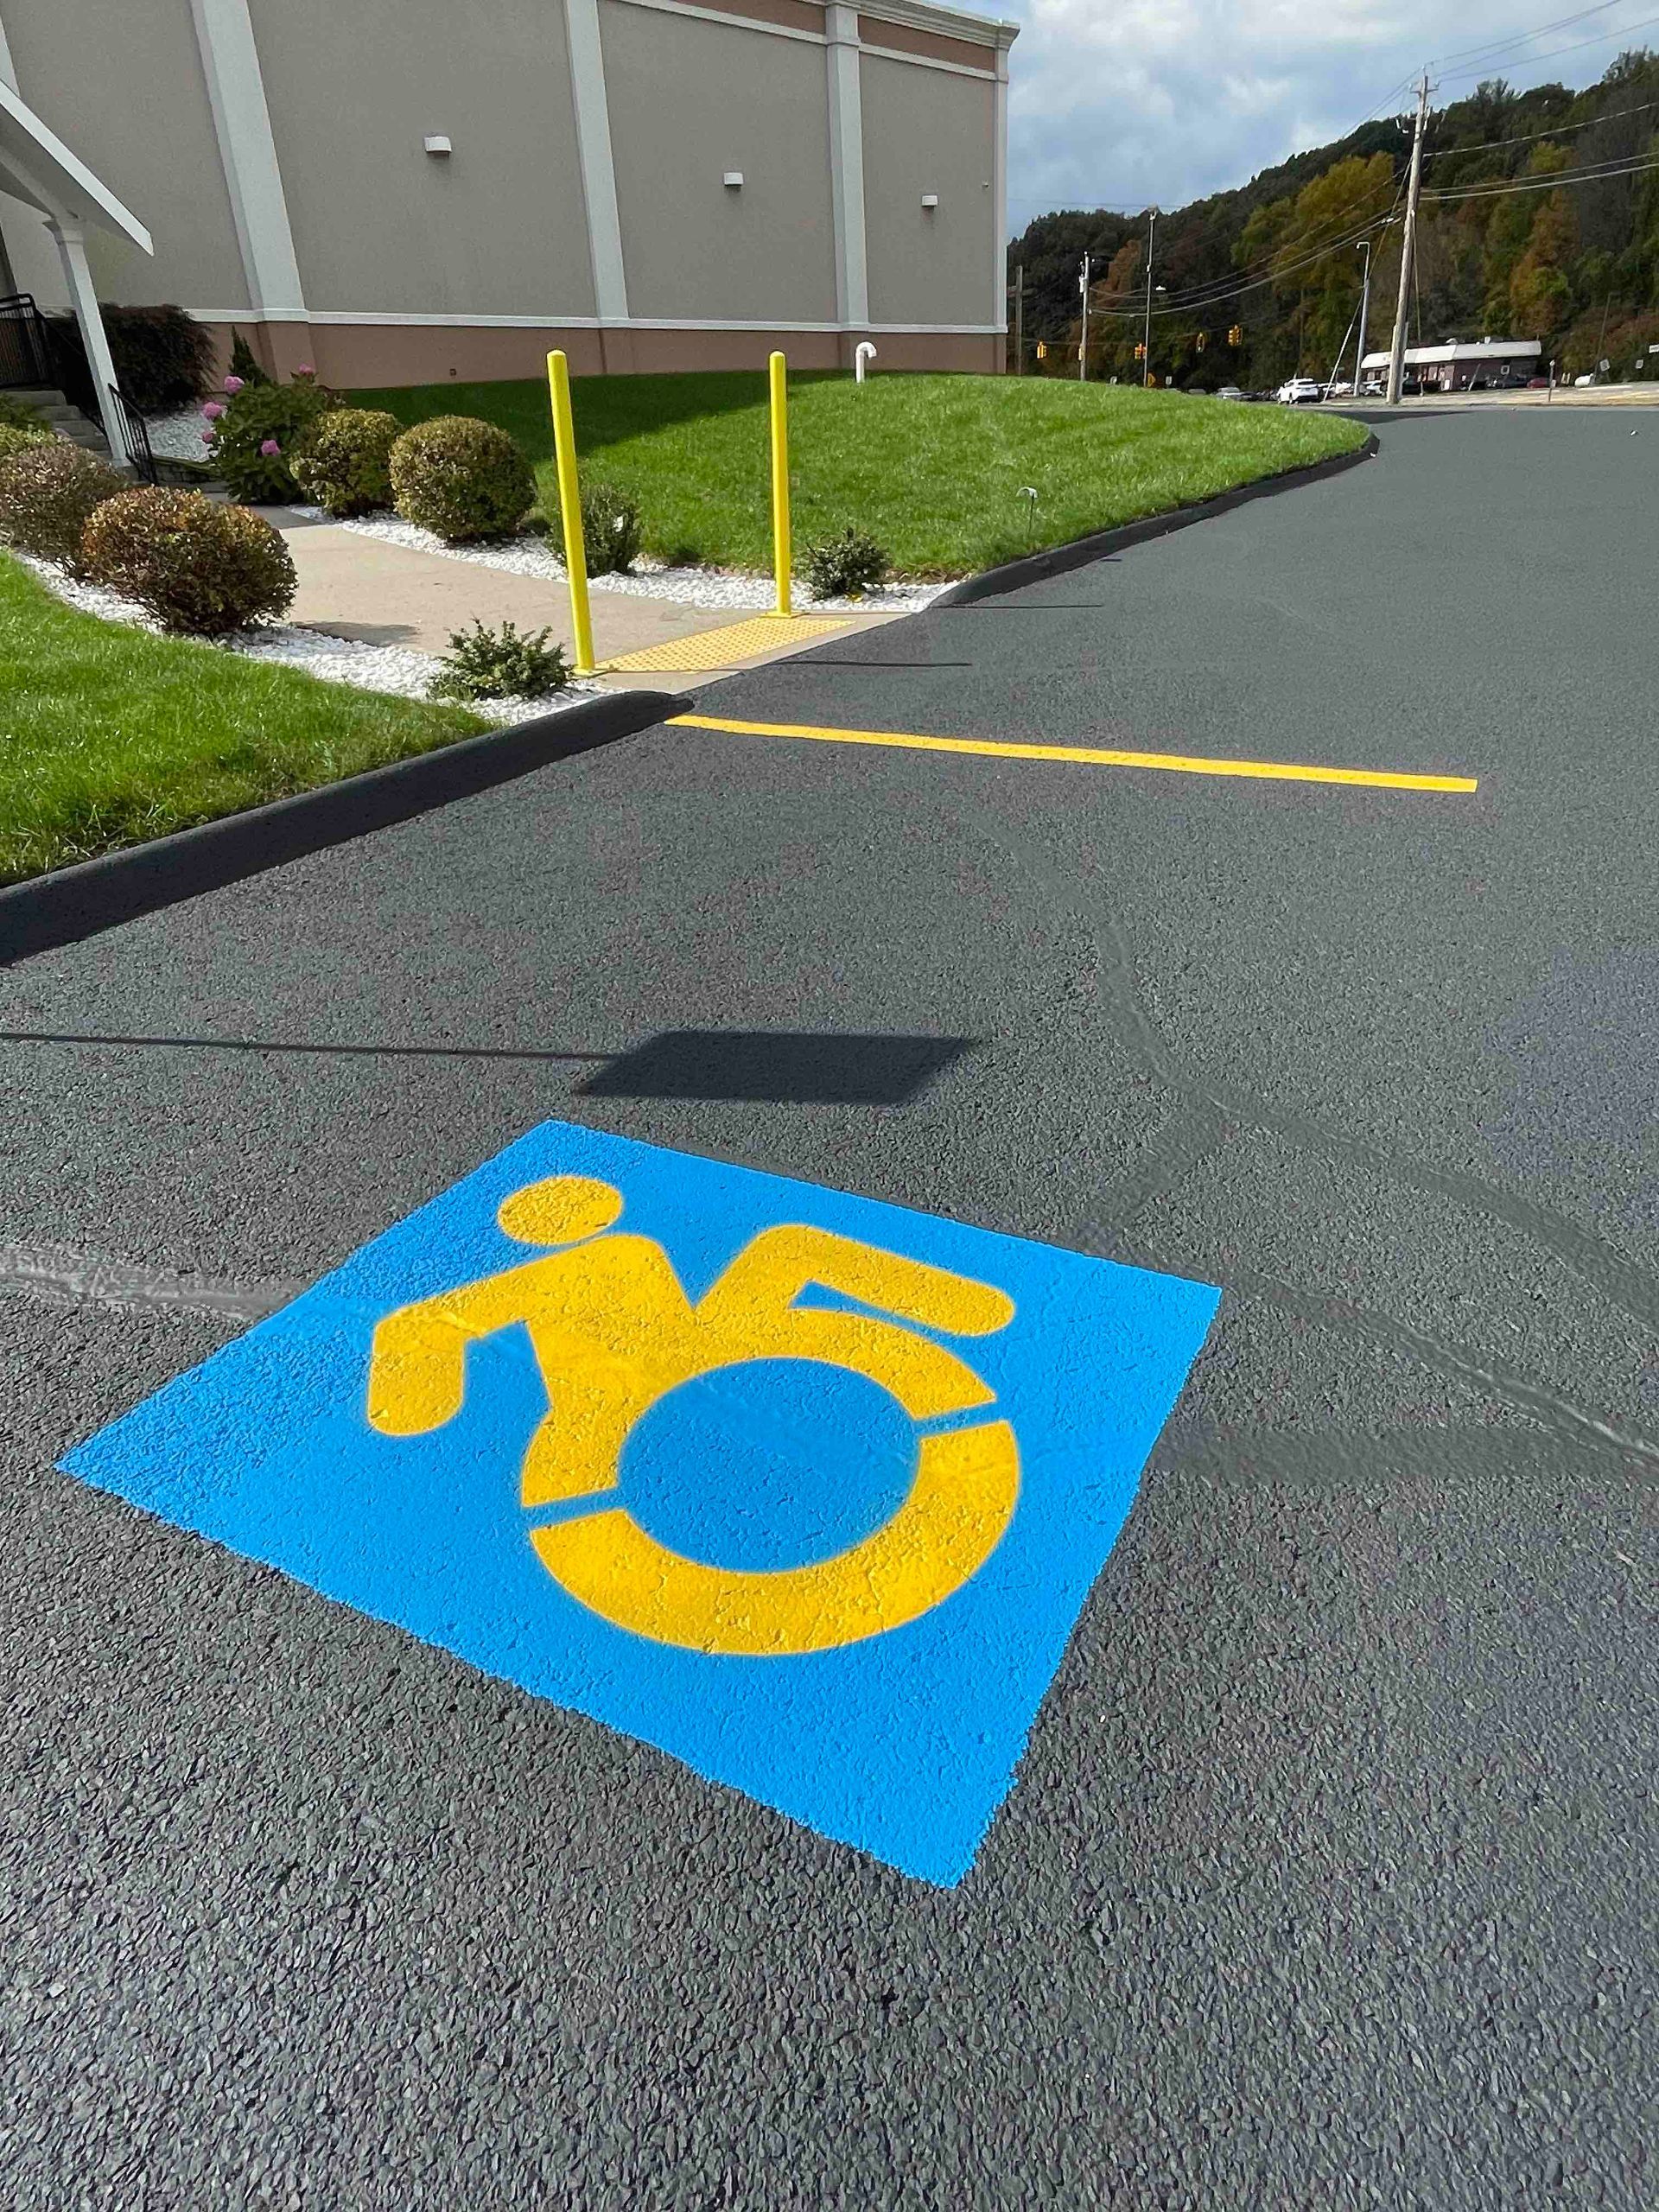 parking lot line striping, seal coating, and handicap marker painted in glastonbury, ct